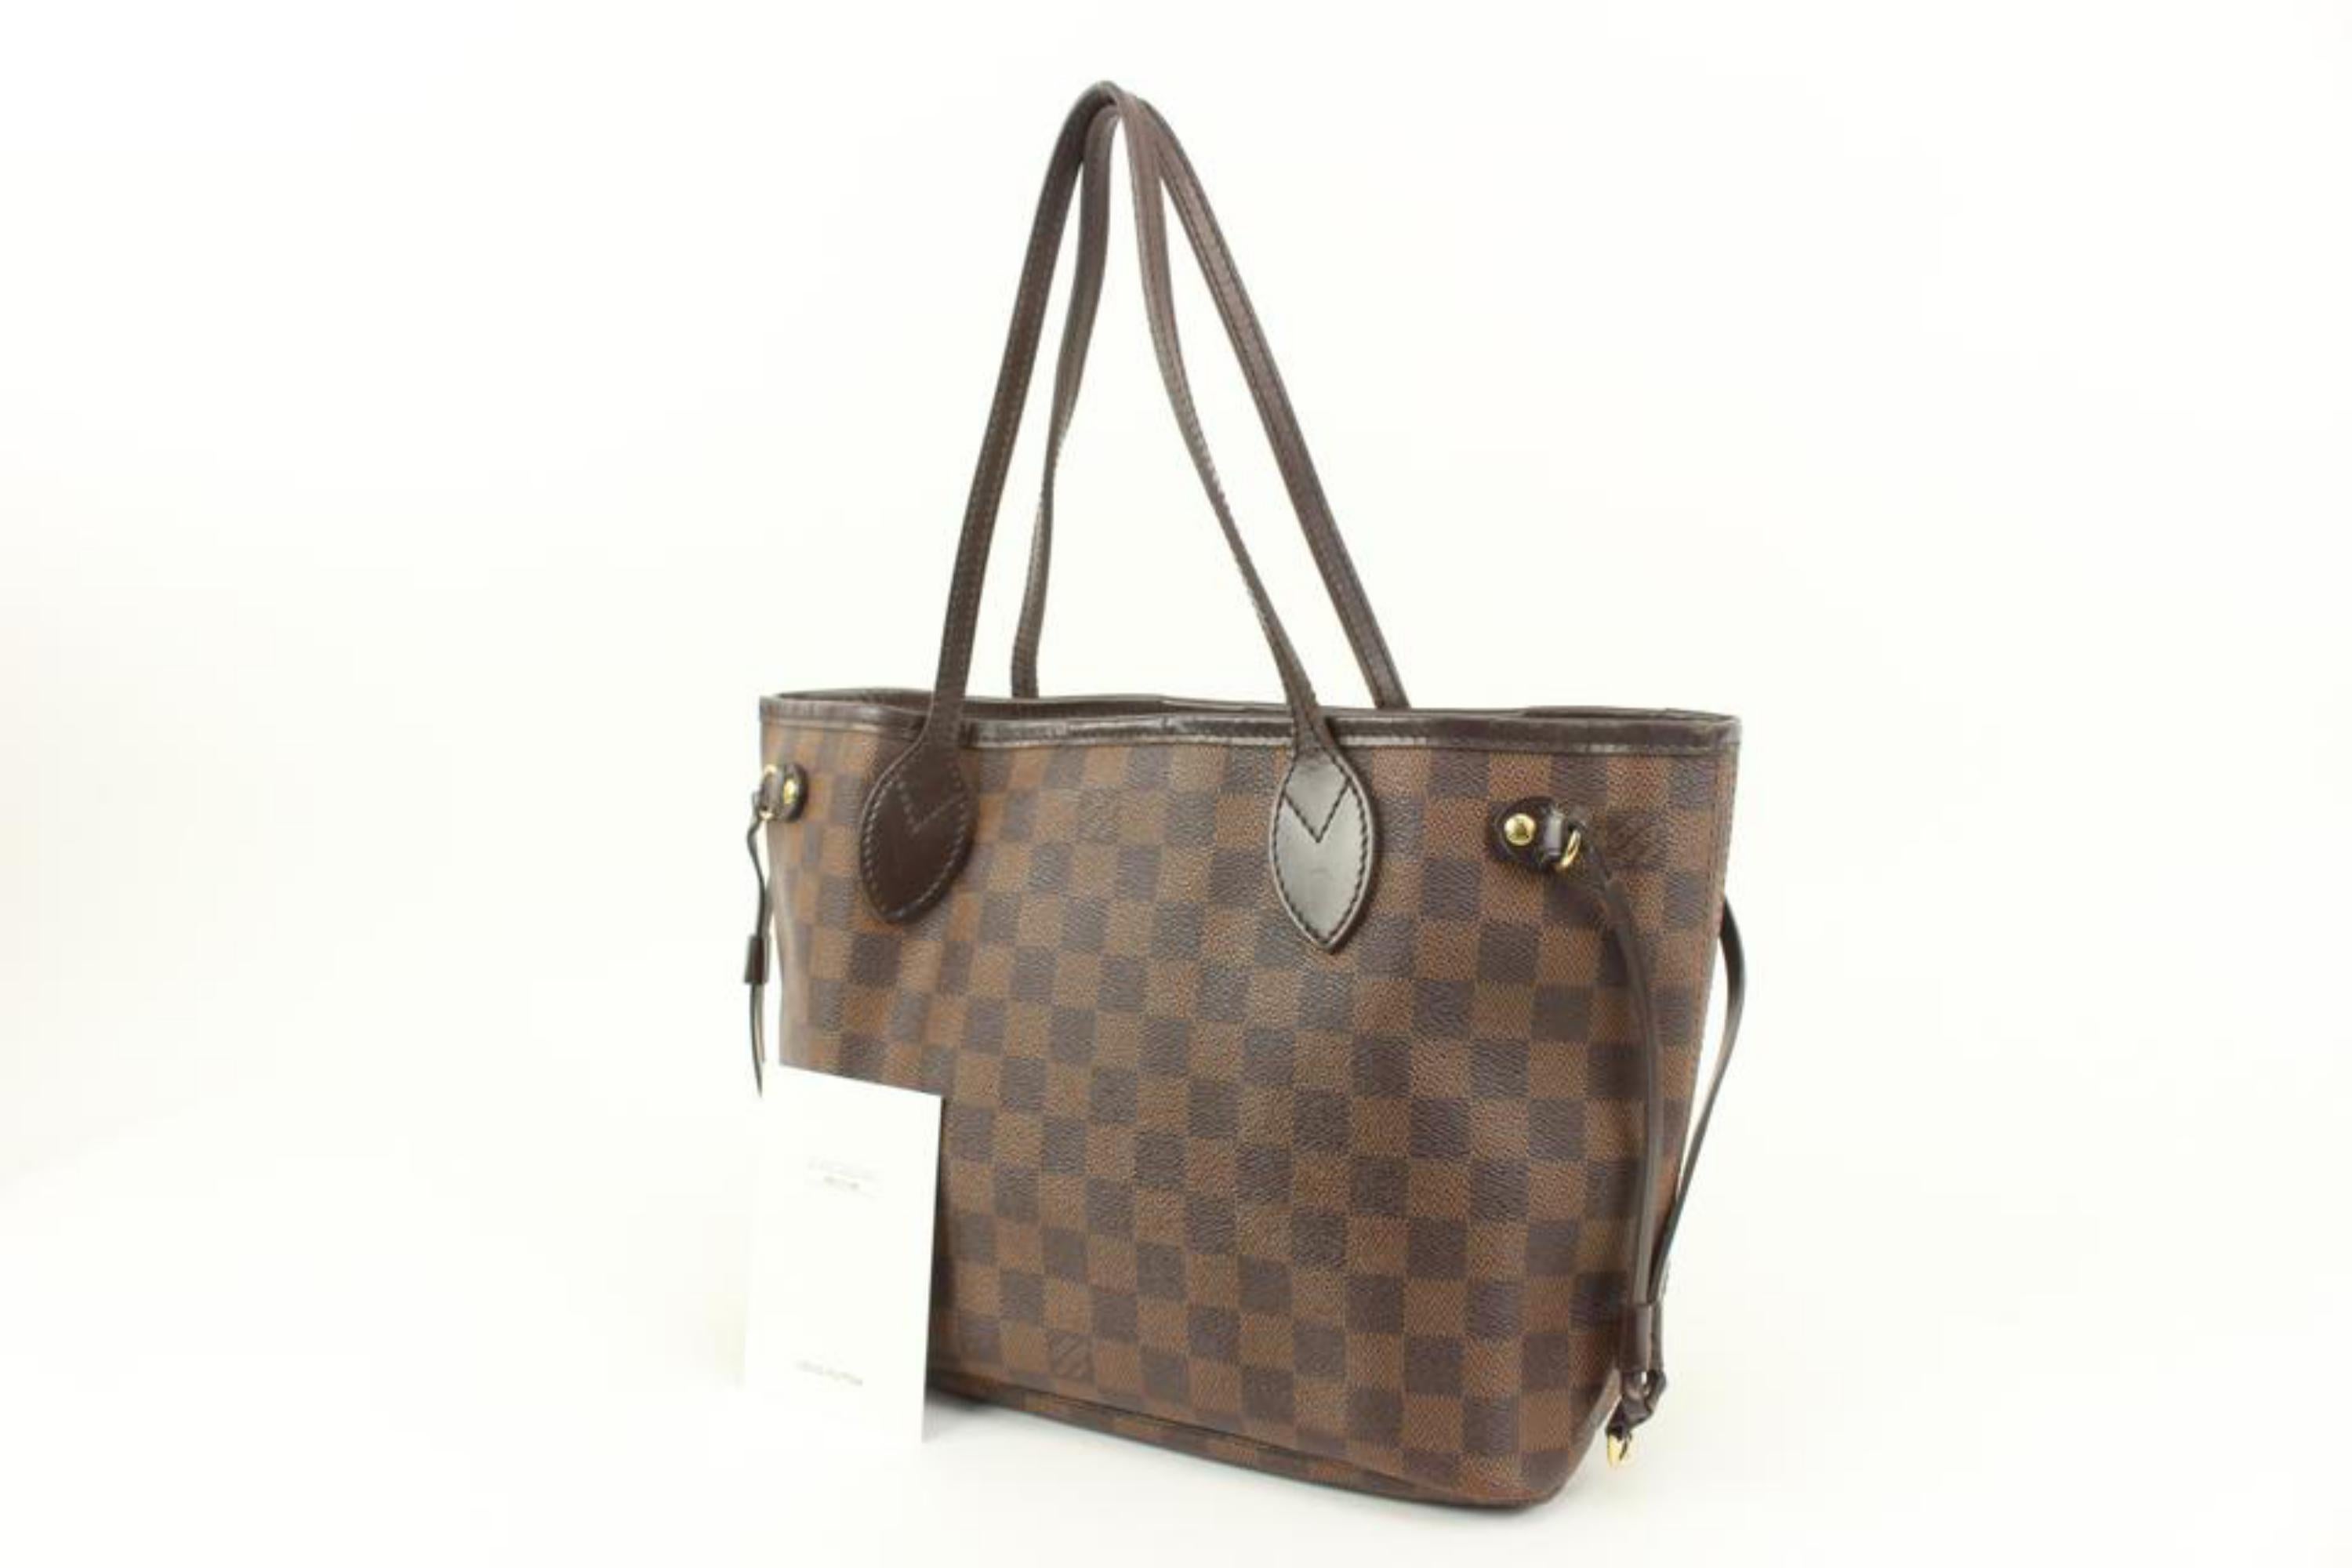 Louis Vuitton Small Damier Ebene Neverfull PM Tote Bag 4lv34s
Date Code/Serial Number: MB2190
Made In: France
Measurements: Length:  14.5